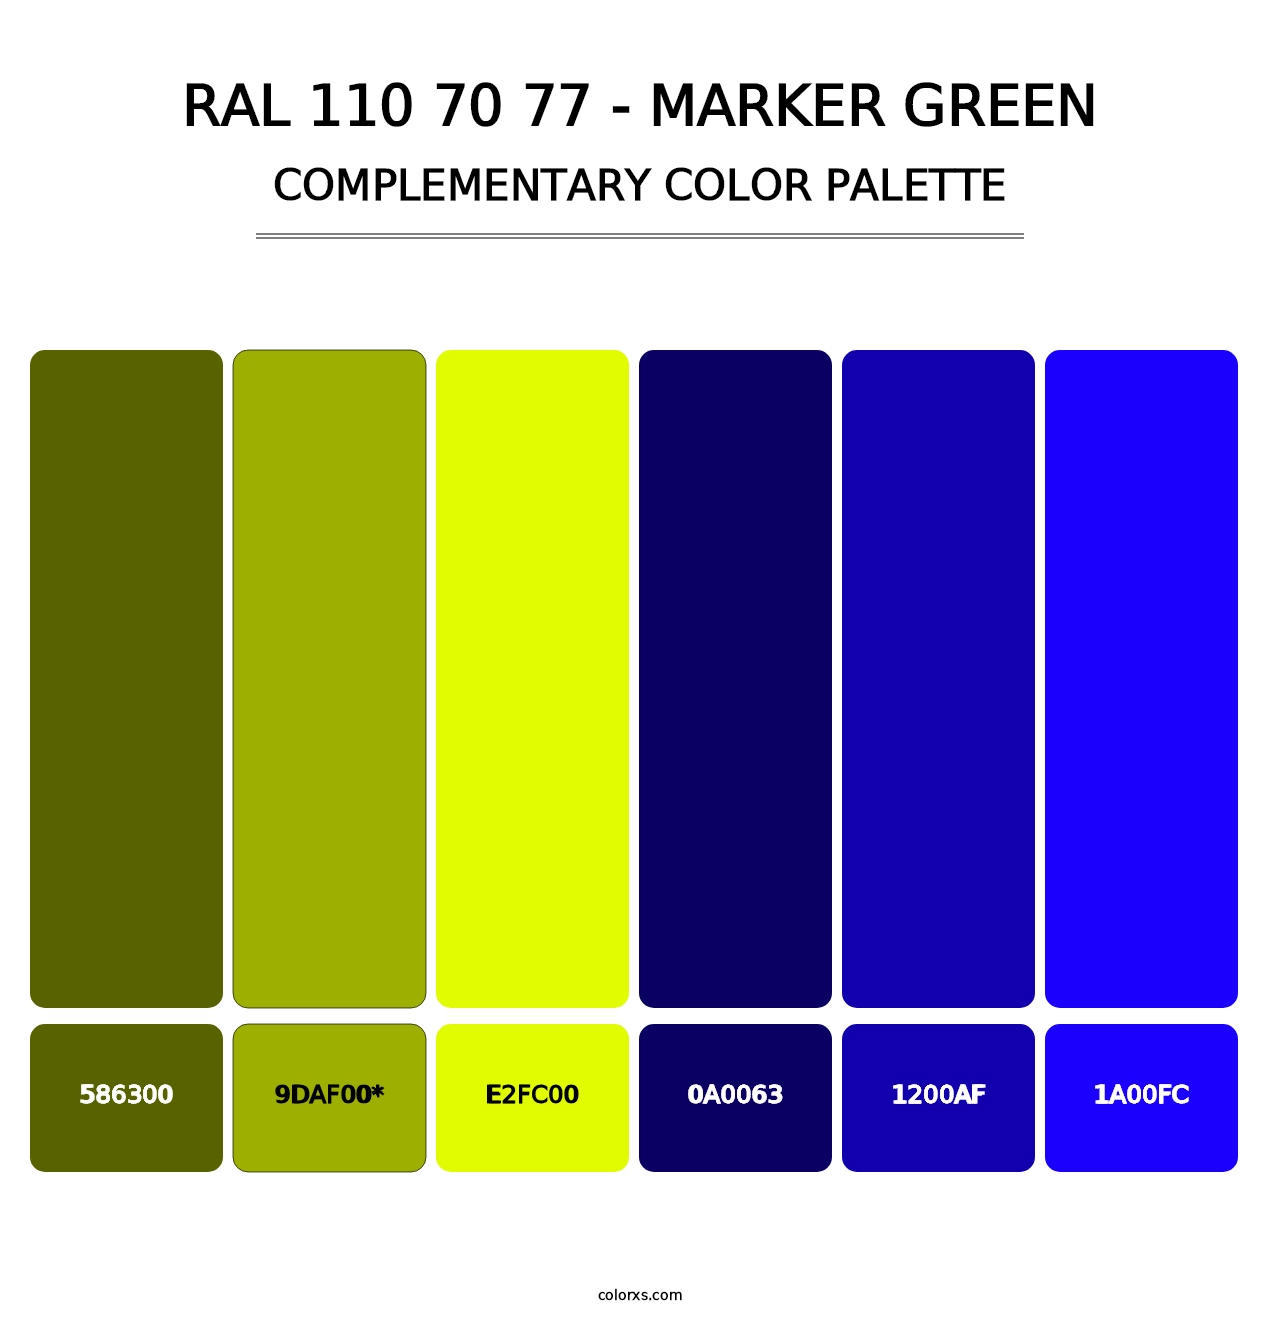 RAL 110 70 77 - Marker Green - Complementary Color Palette